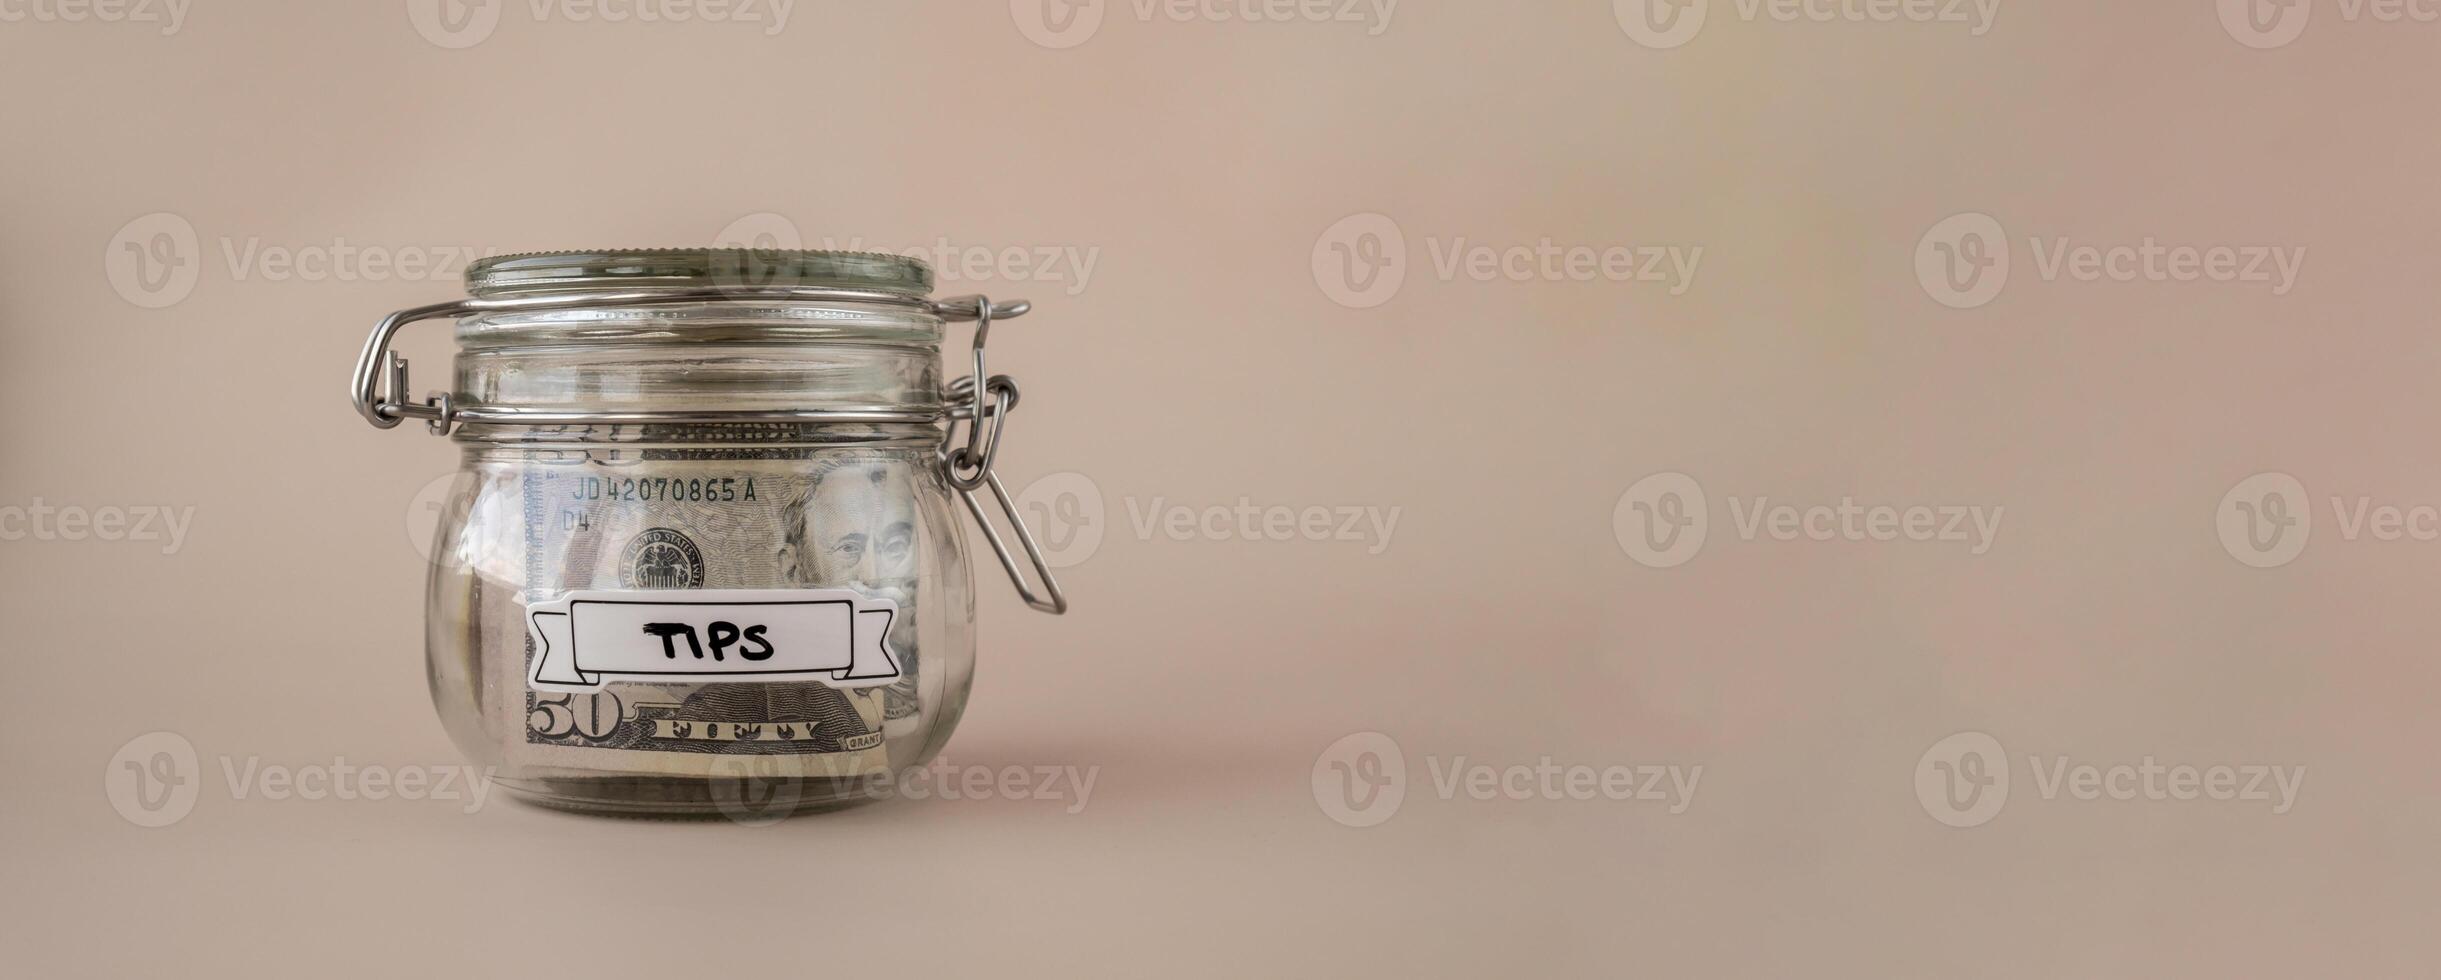 Saving Money In Glass Jar filled with Dollars banknotes. TIPS transcription in front of jar. Managing personal finances extra income for future insecurity. Beige background photo